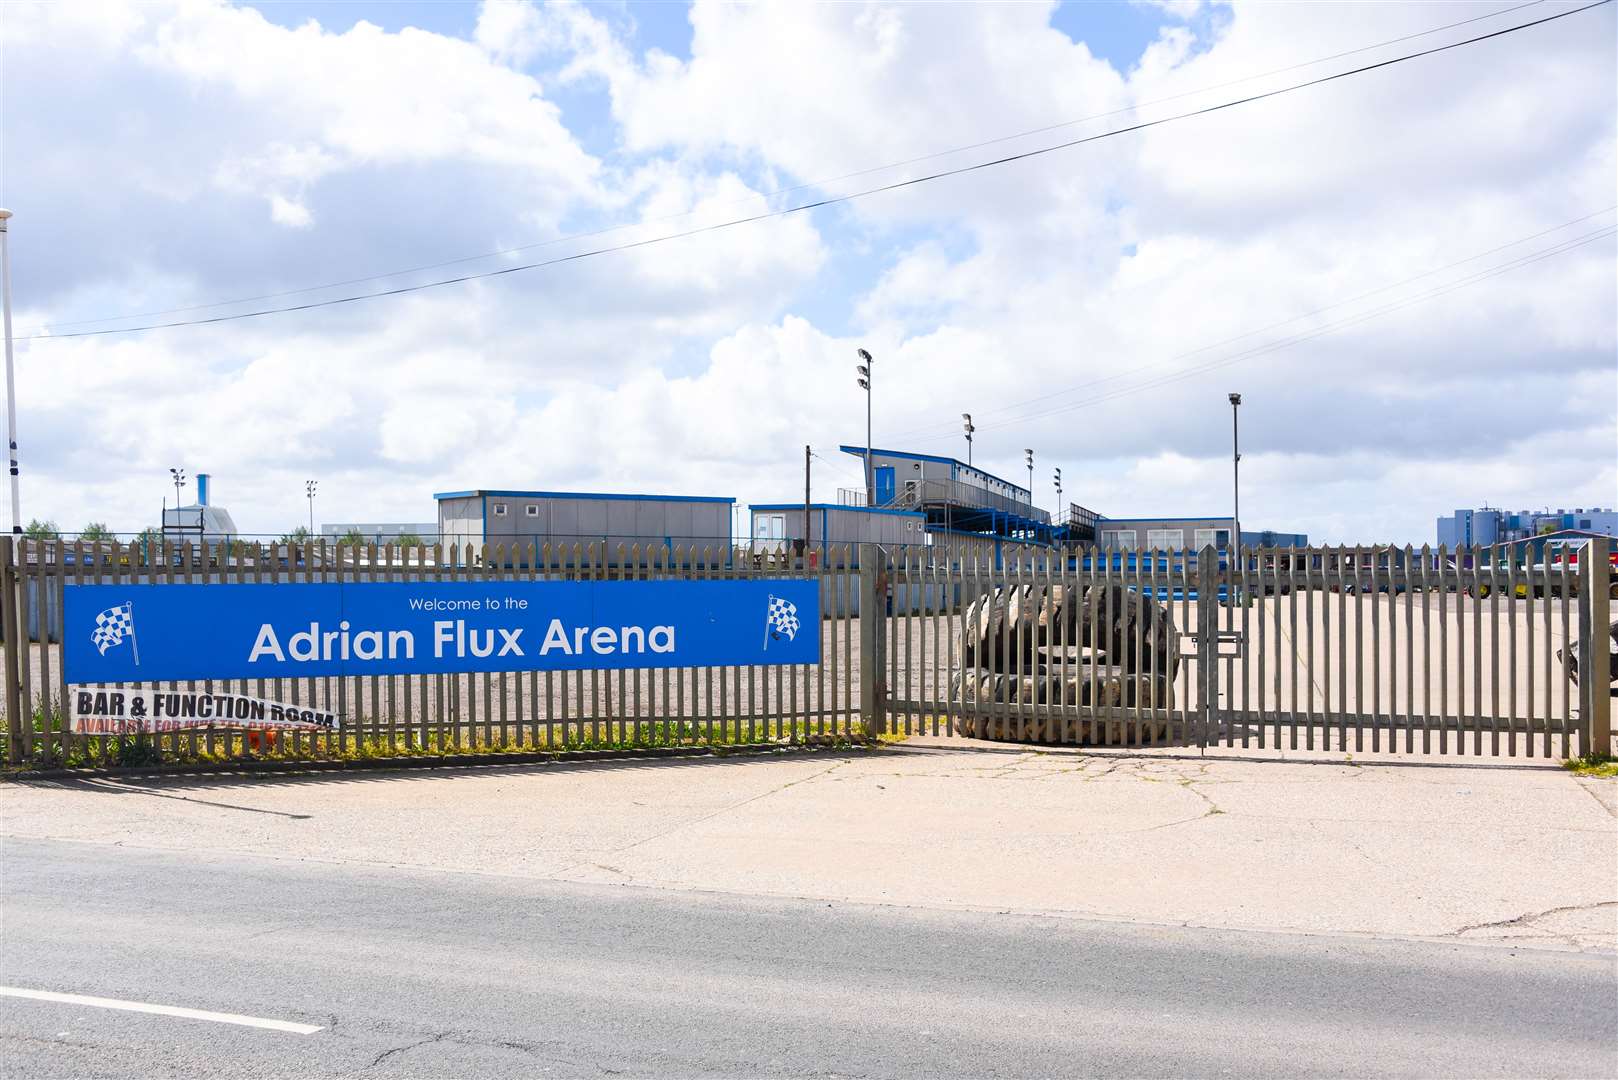 The Adrian Flux Arena is currently closed during the pandemic. Picture: Ian Burt (43879399)